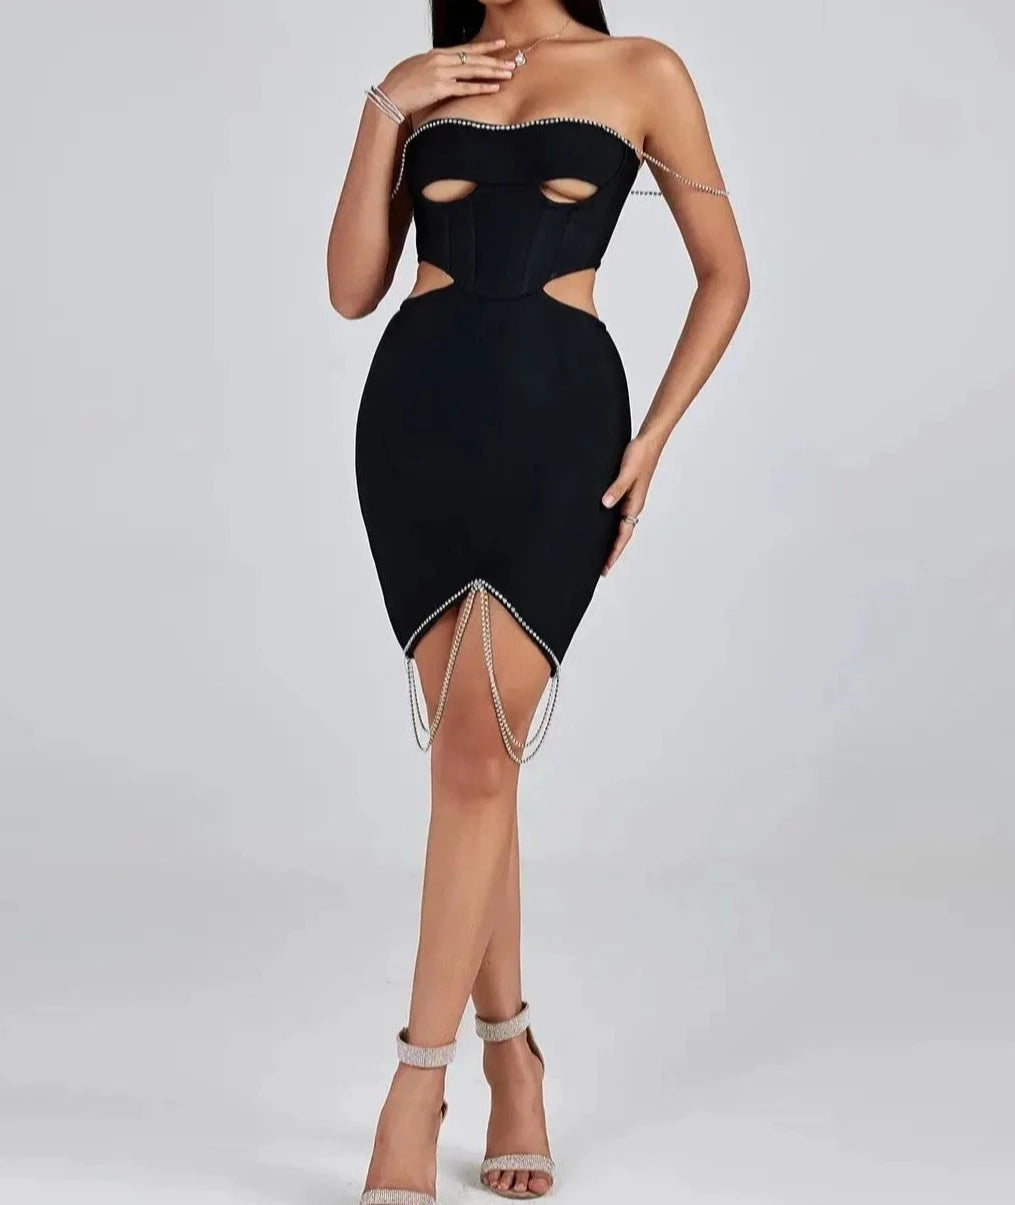 A&A Luxe Cut out Black Crystal Embellished Mini dress